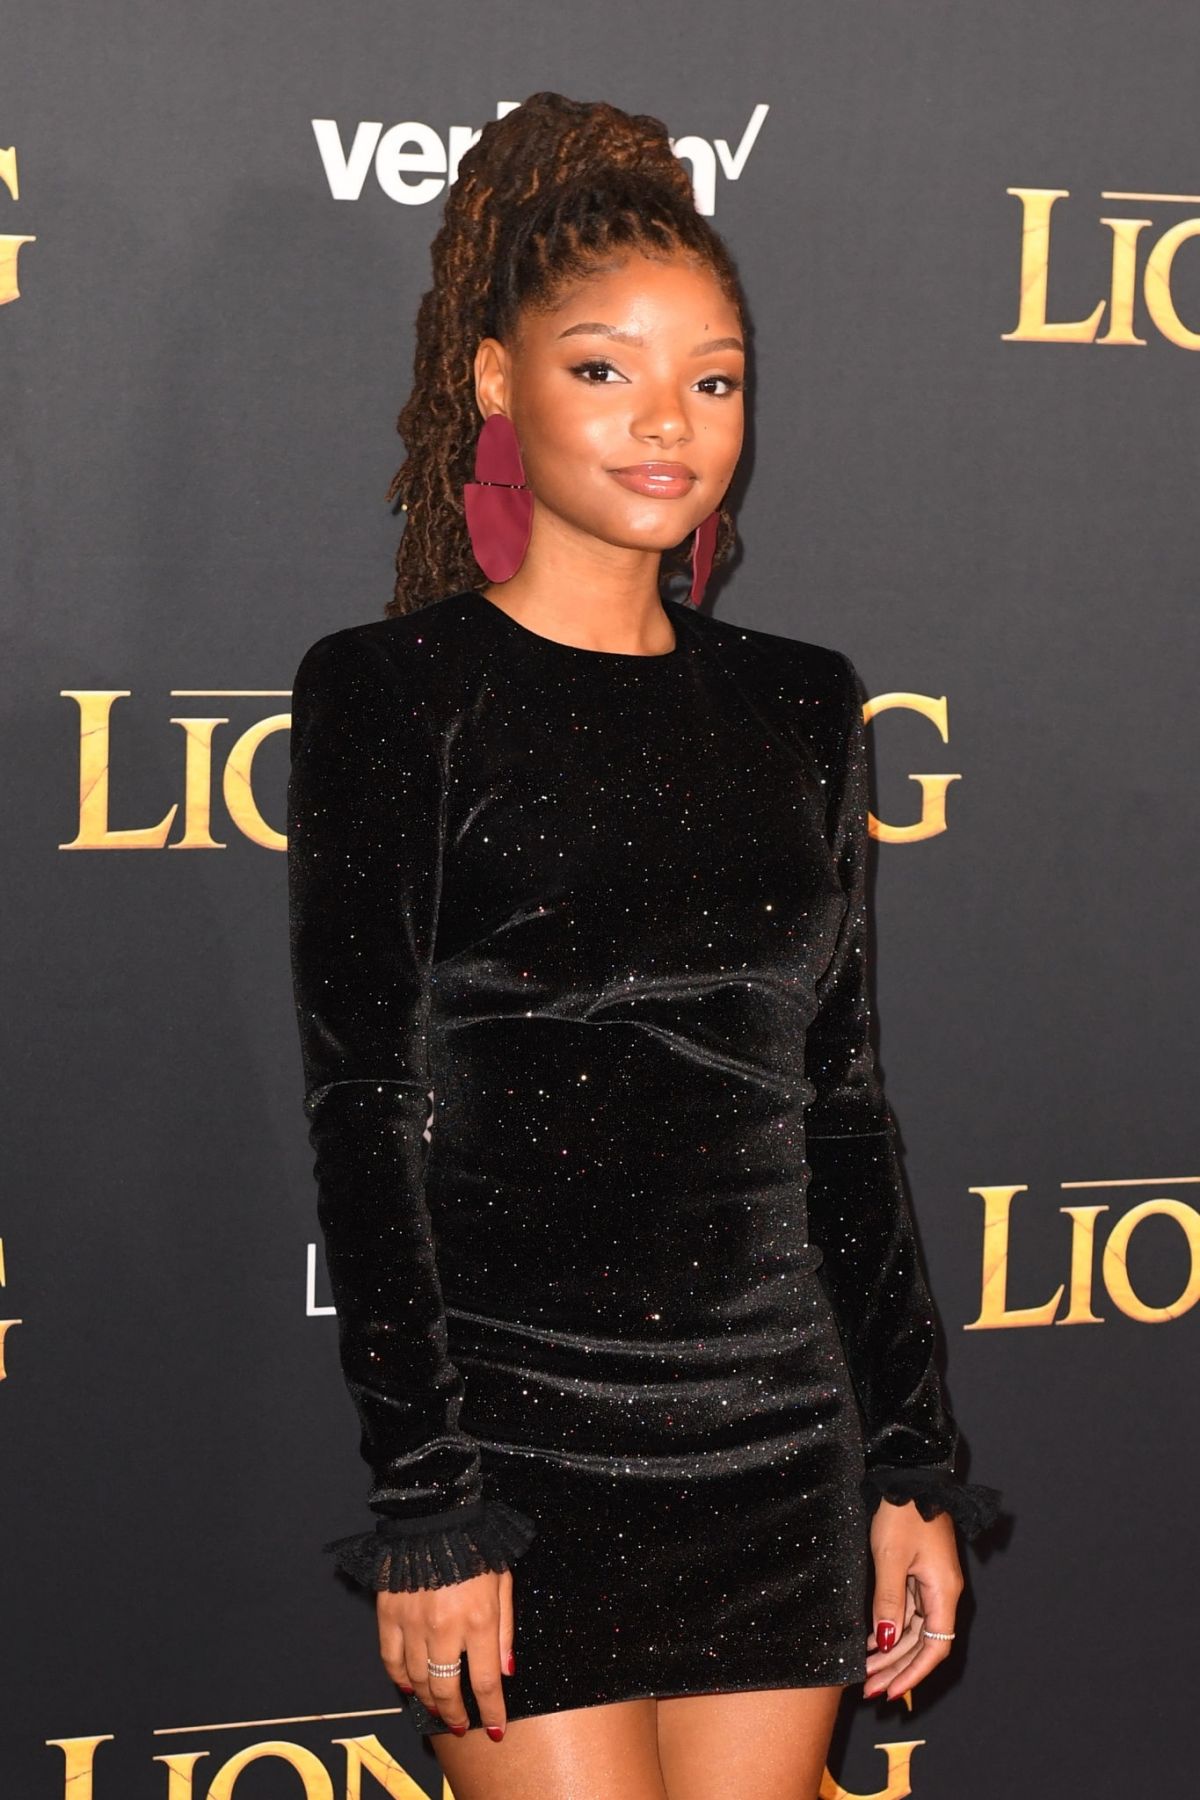 chloe-and-halle-bailey-at-the-lion-king-premiere-in-hollywood-07-09-2019-4.jpg